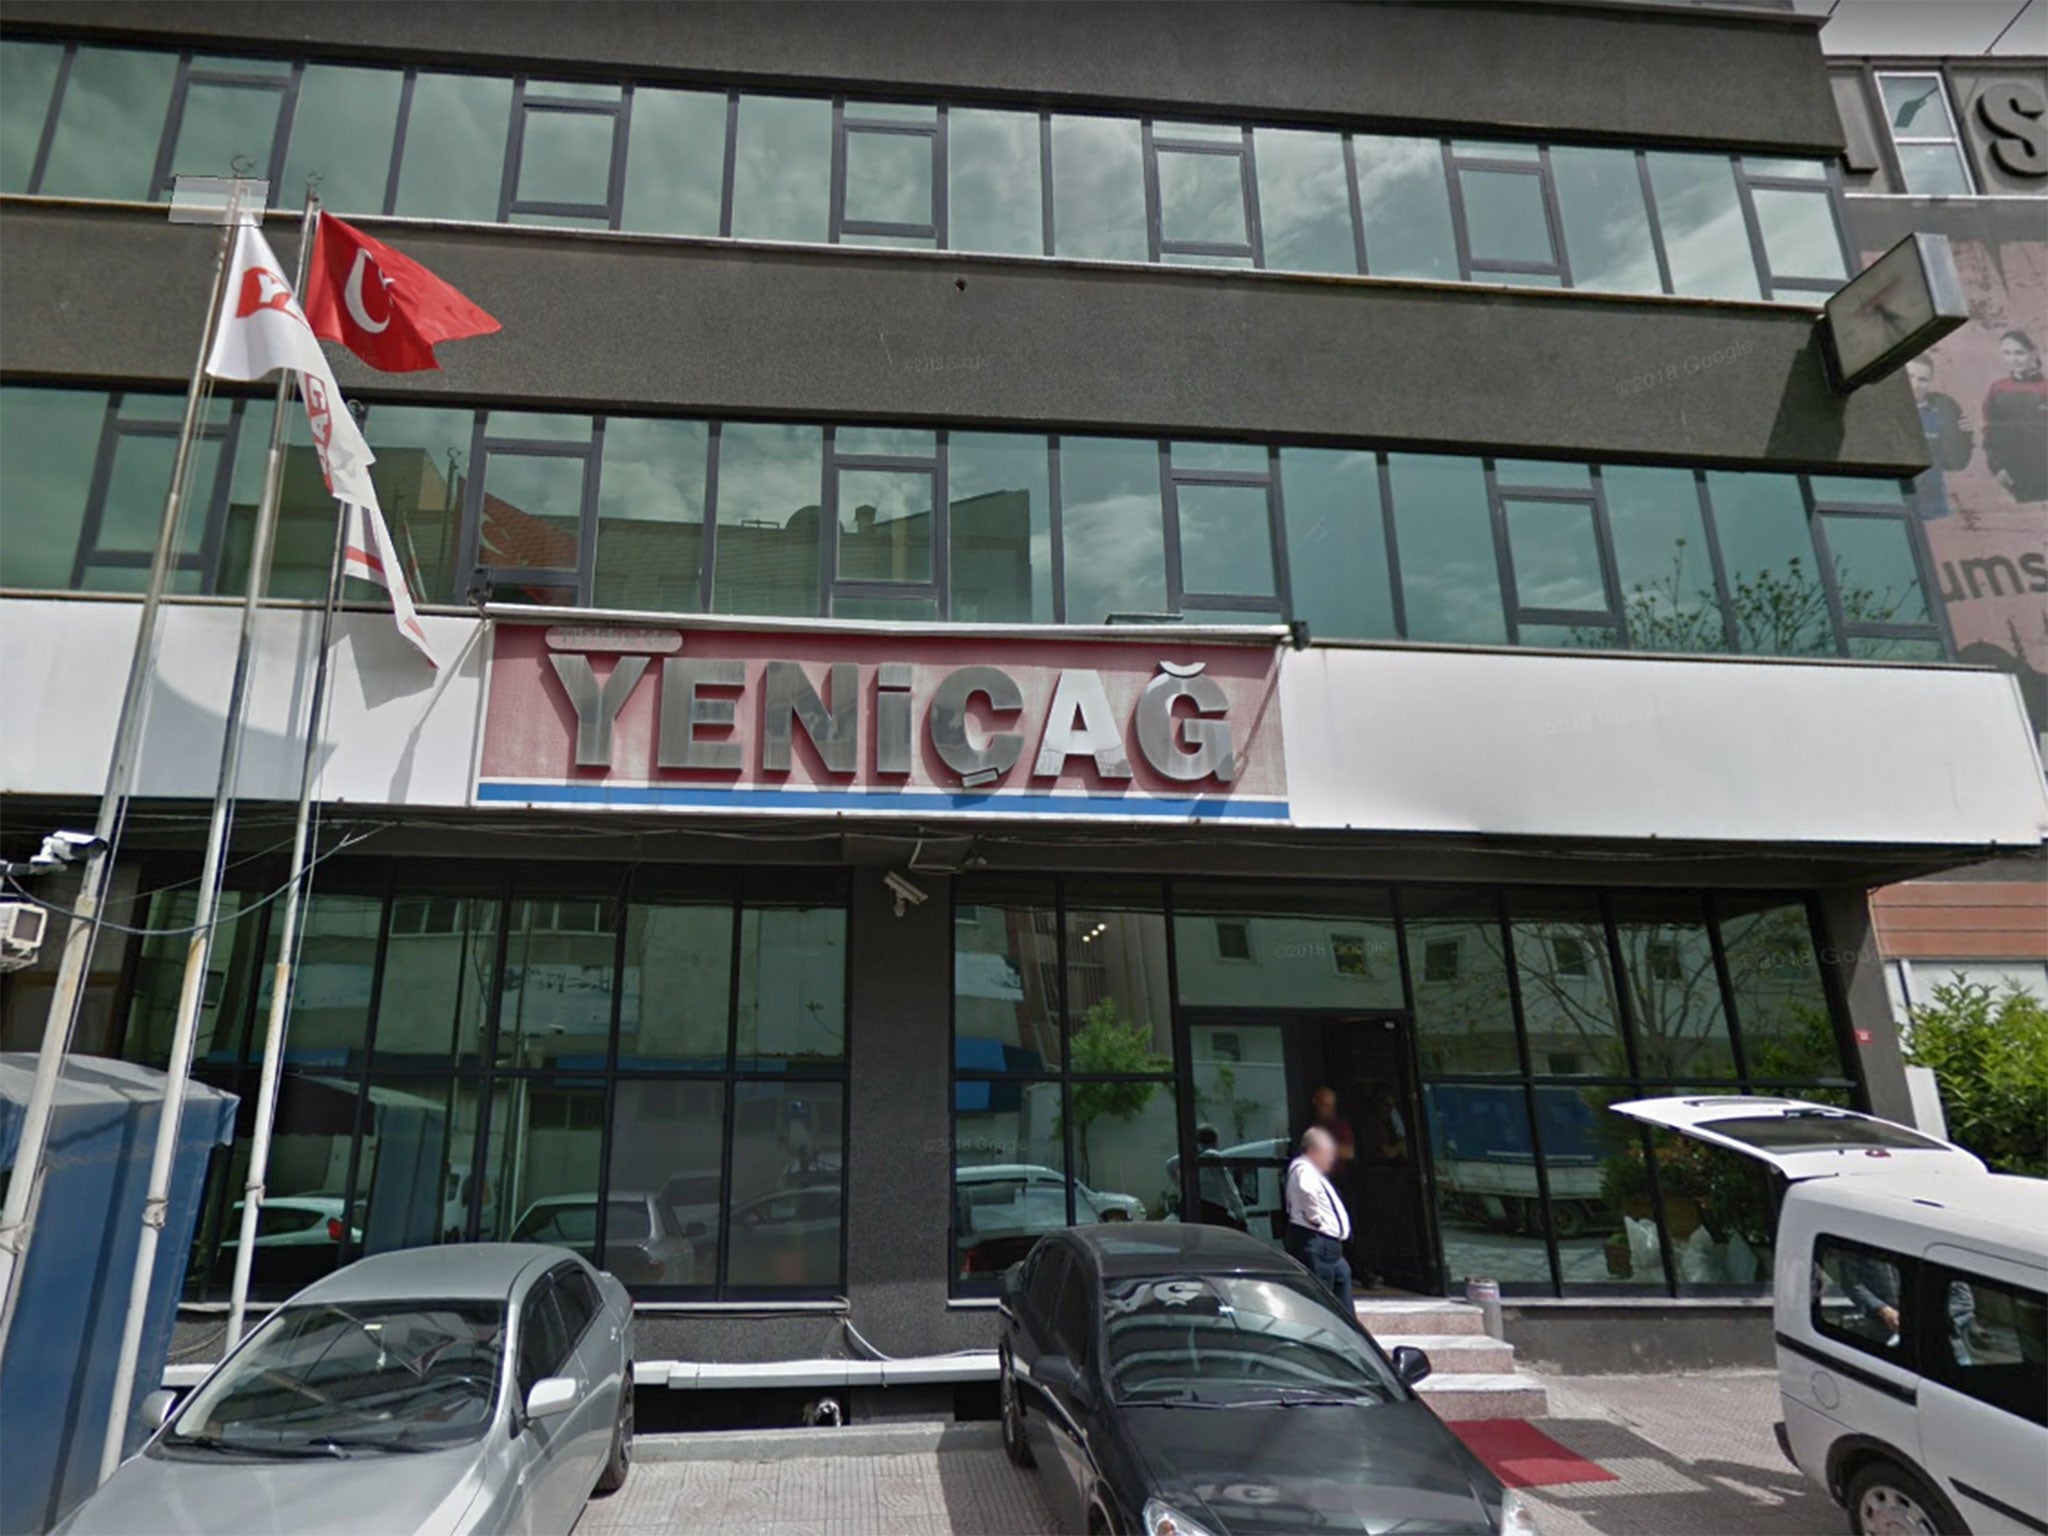 The headquarters of the anti-government Yenicag newspaper in Istanbul, where the assaulted journalist worked